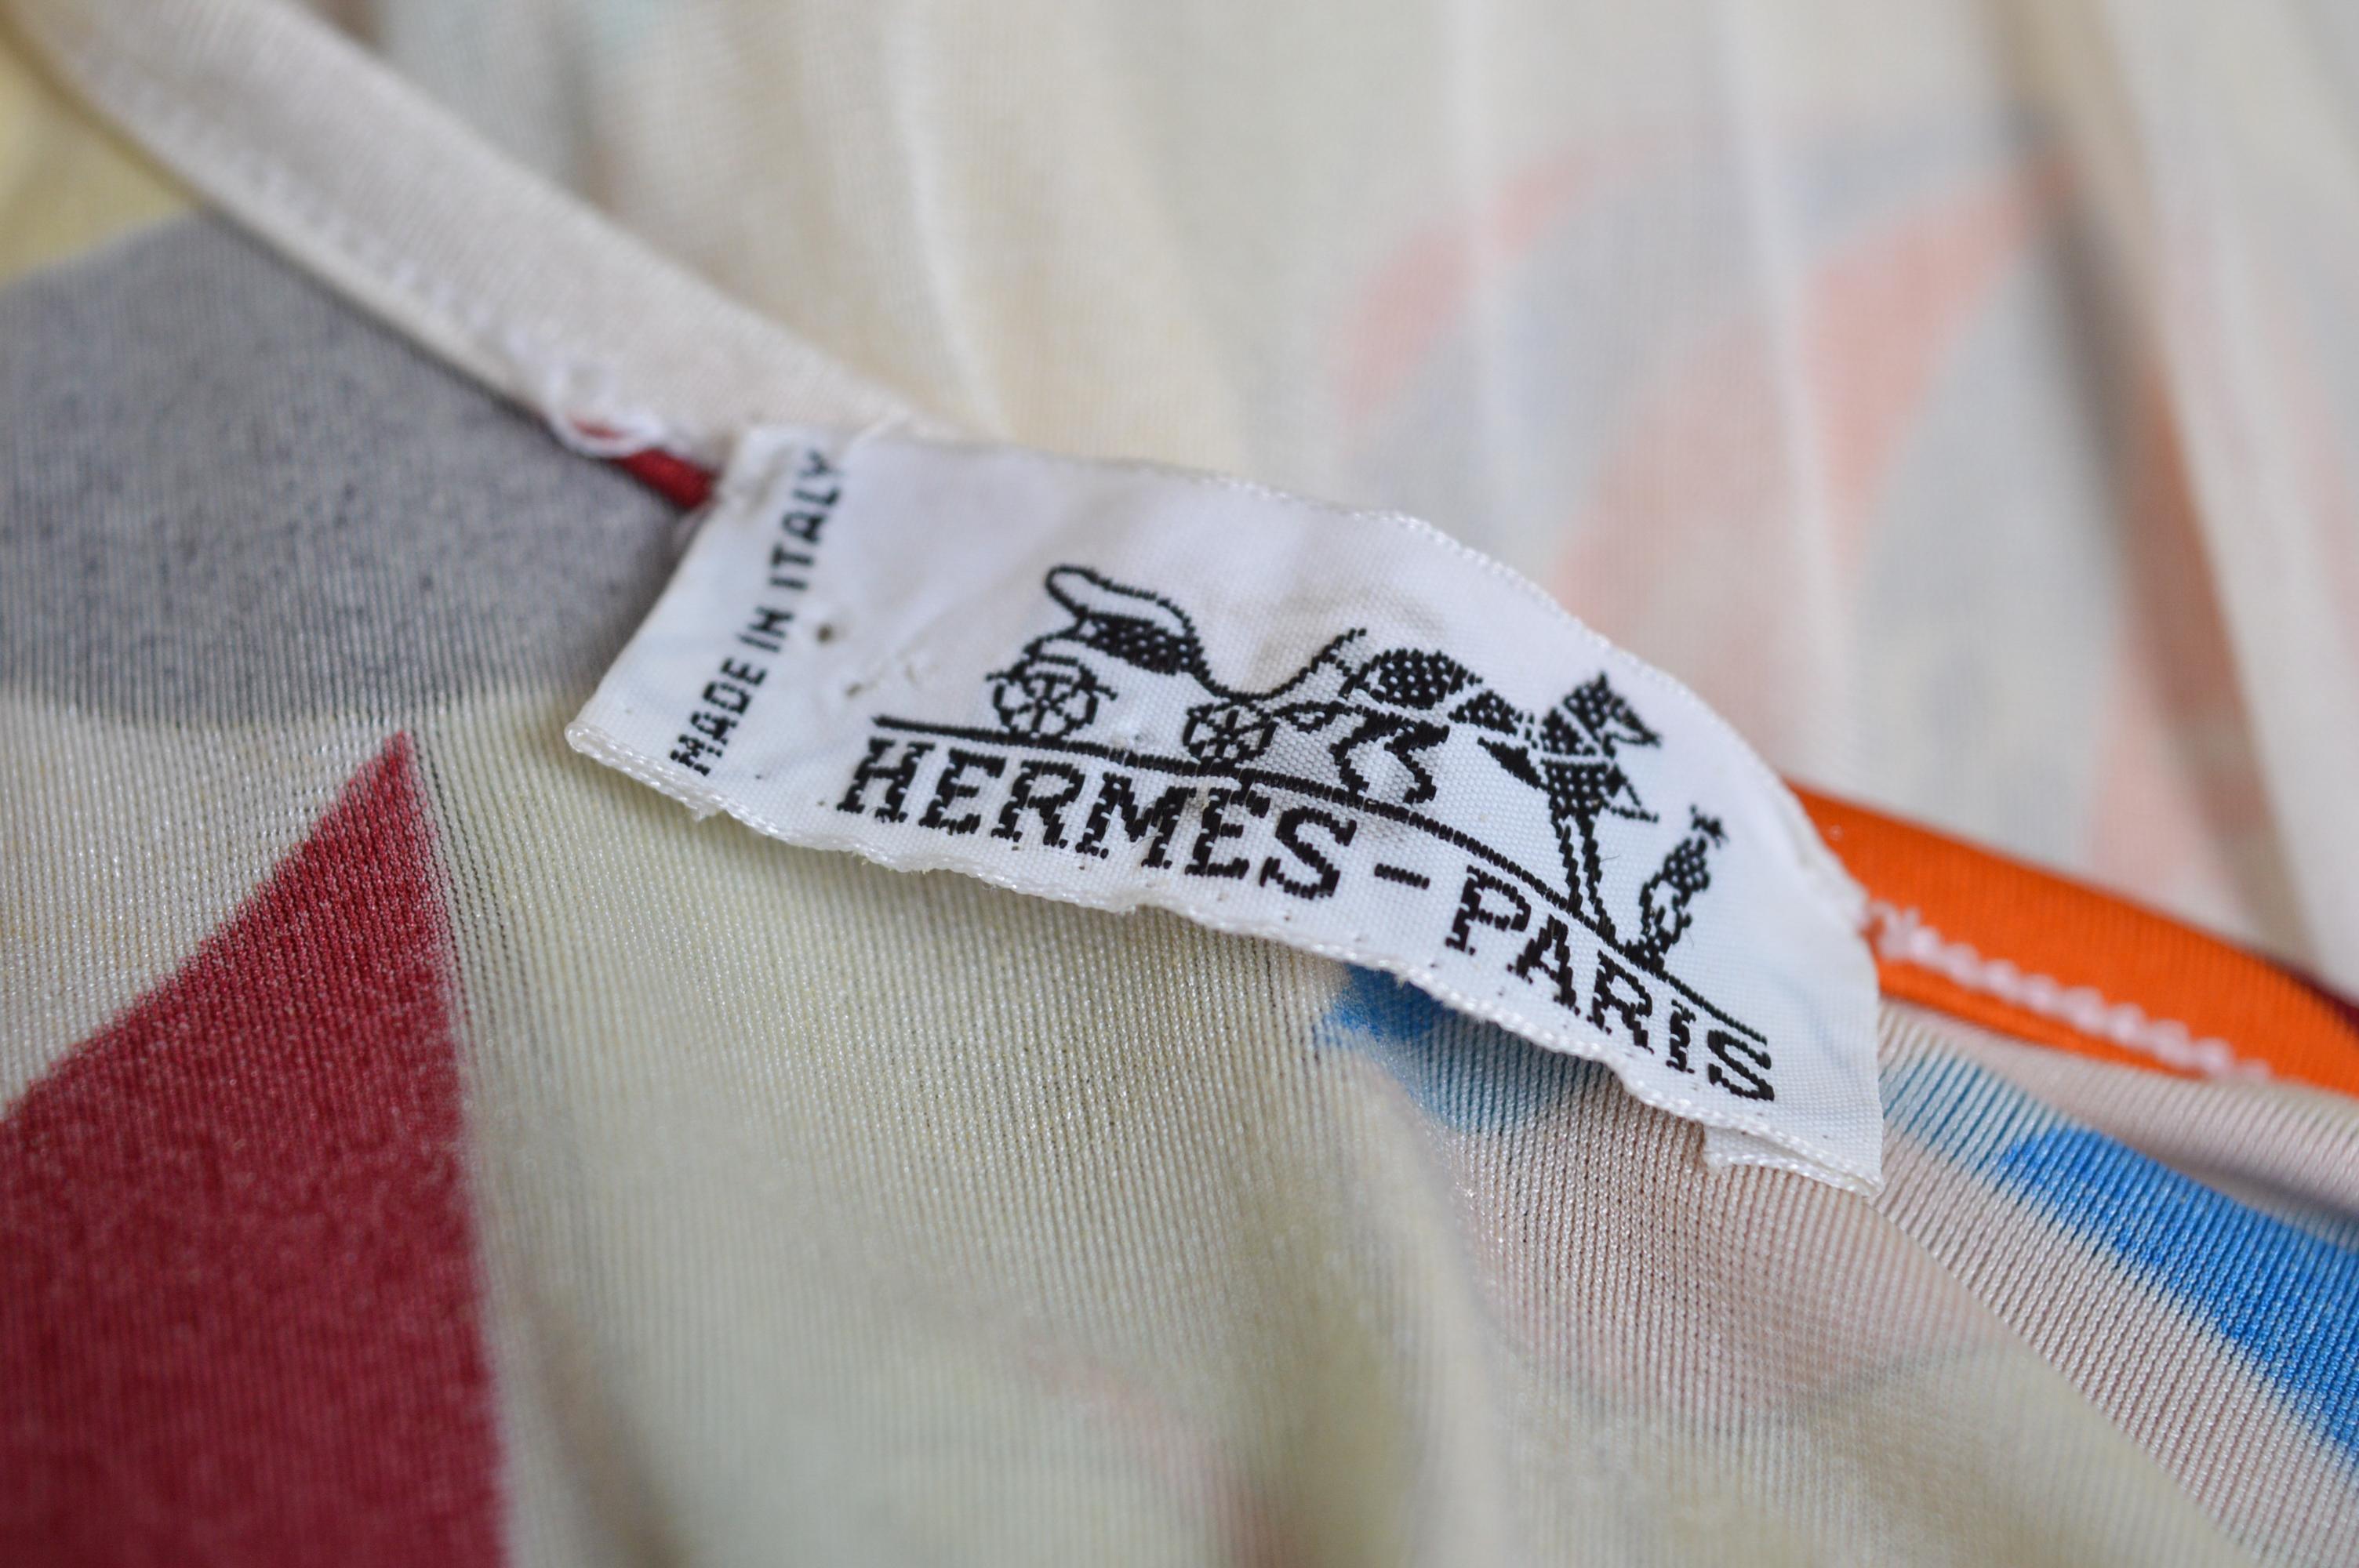 HERMÉS Vintage Bathing Suit - Swimming Costume Hot Air Balloon Patterned Print For Sale 7